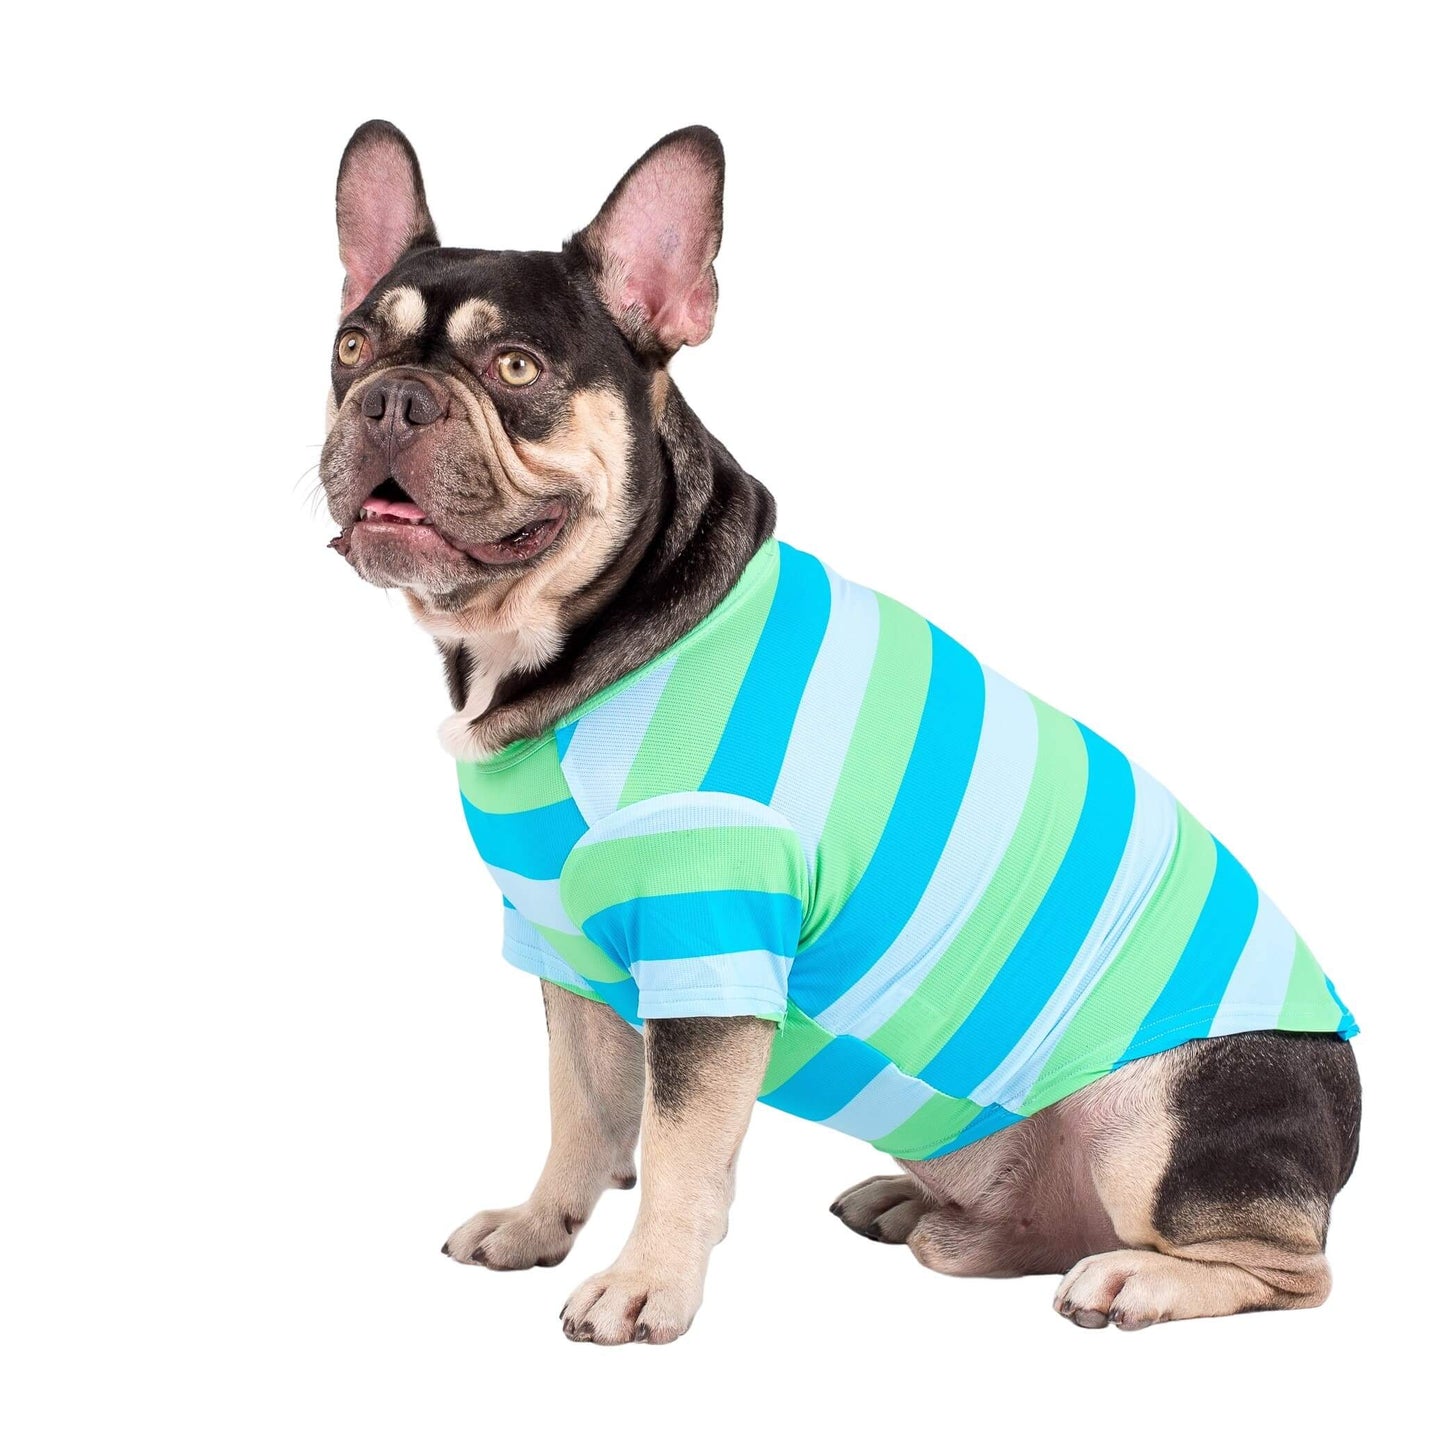 Side shot of a French Bulldog wearing Vibrant Hound's Seriously Stripey dog cooling shirt.